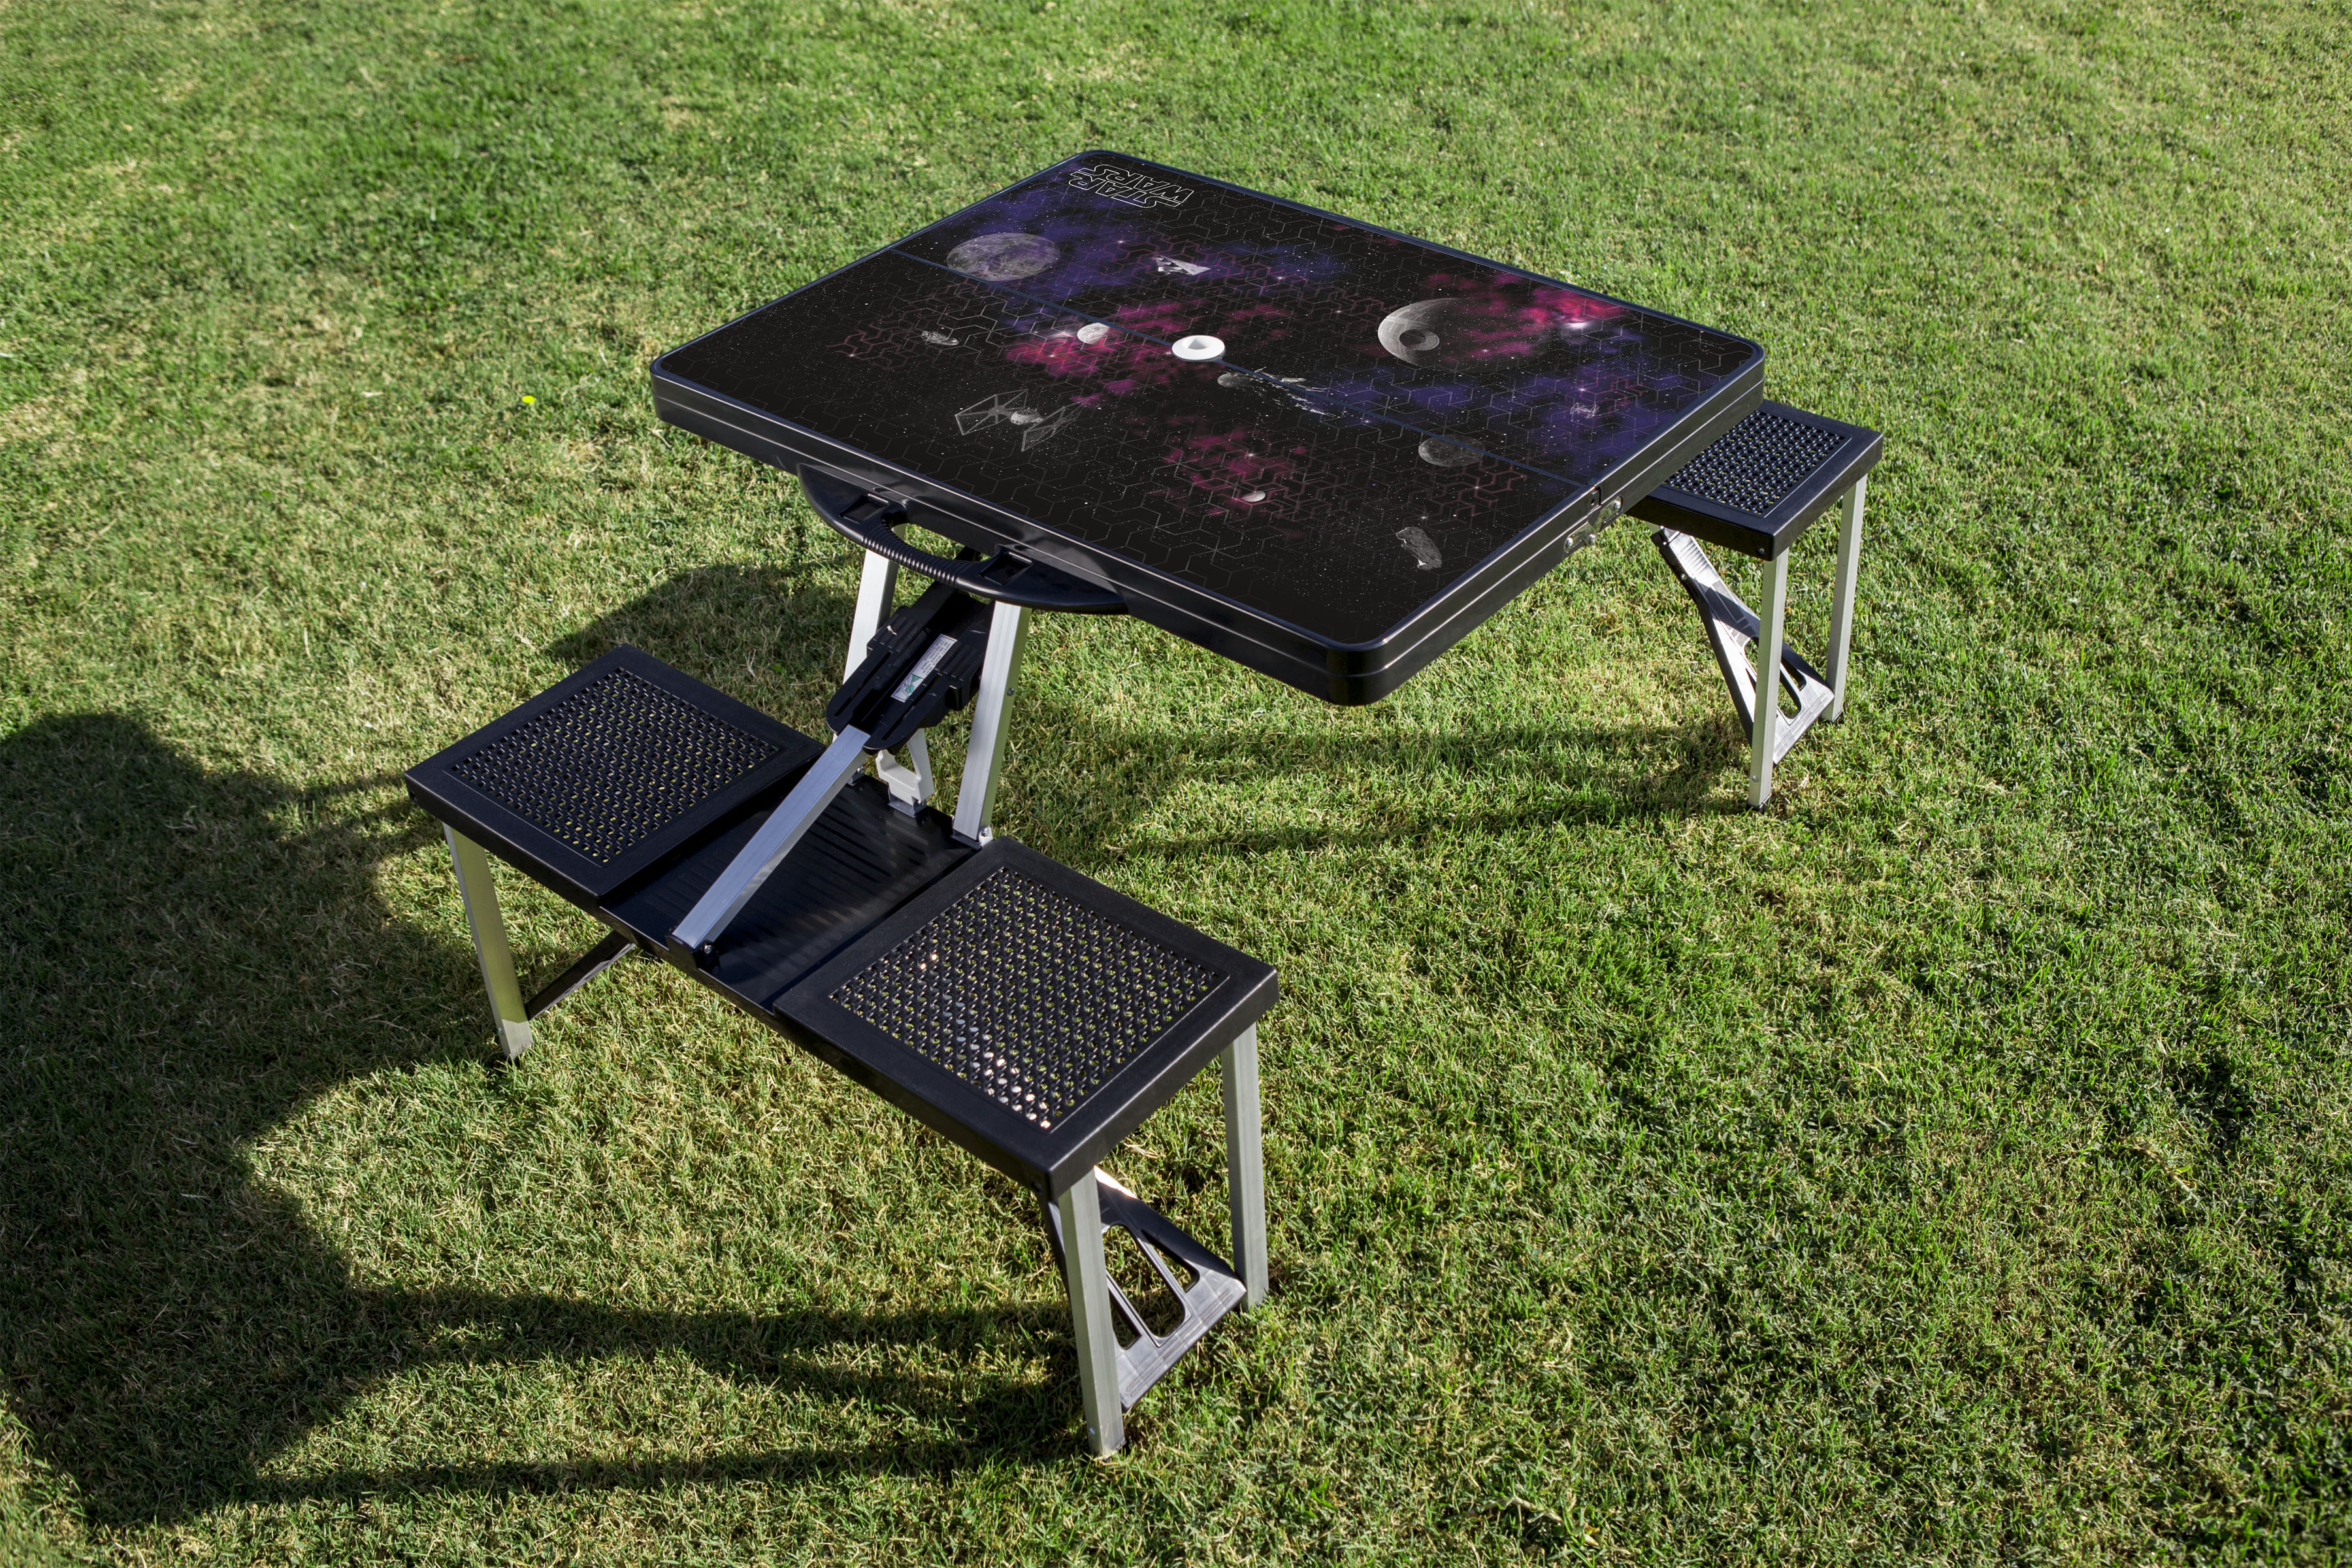 Death Star - Star Wars - Picnic Table Portable Folding Table with Seats